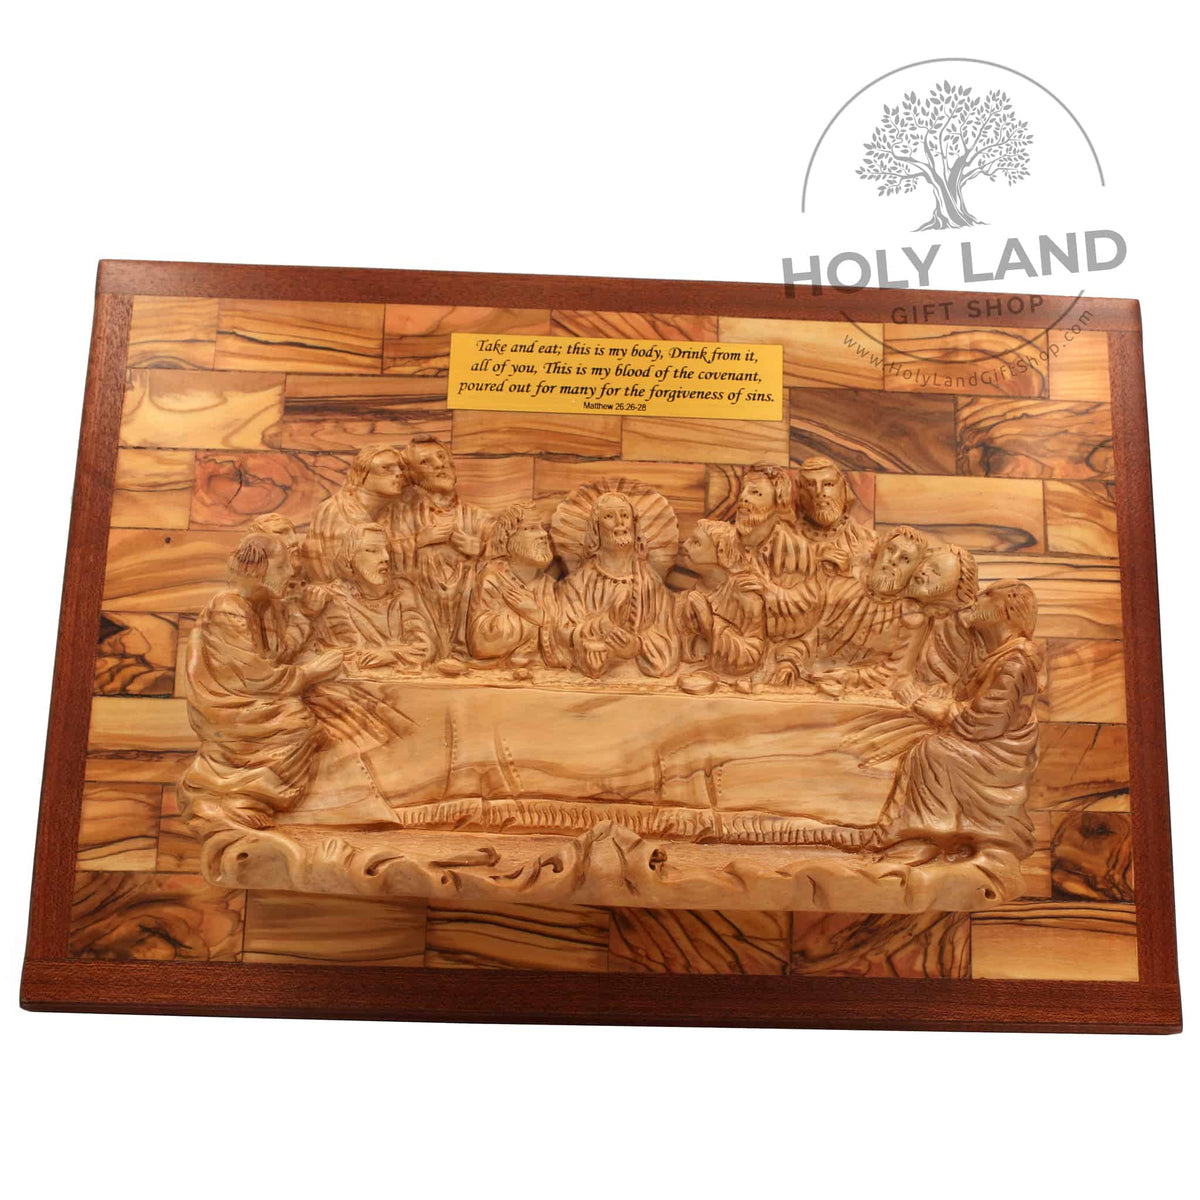 Last Supper Prayer Before Meals Rustic Wood Plaque - Nelson Gifts